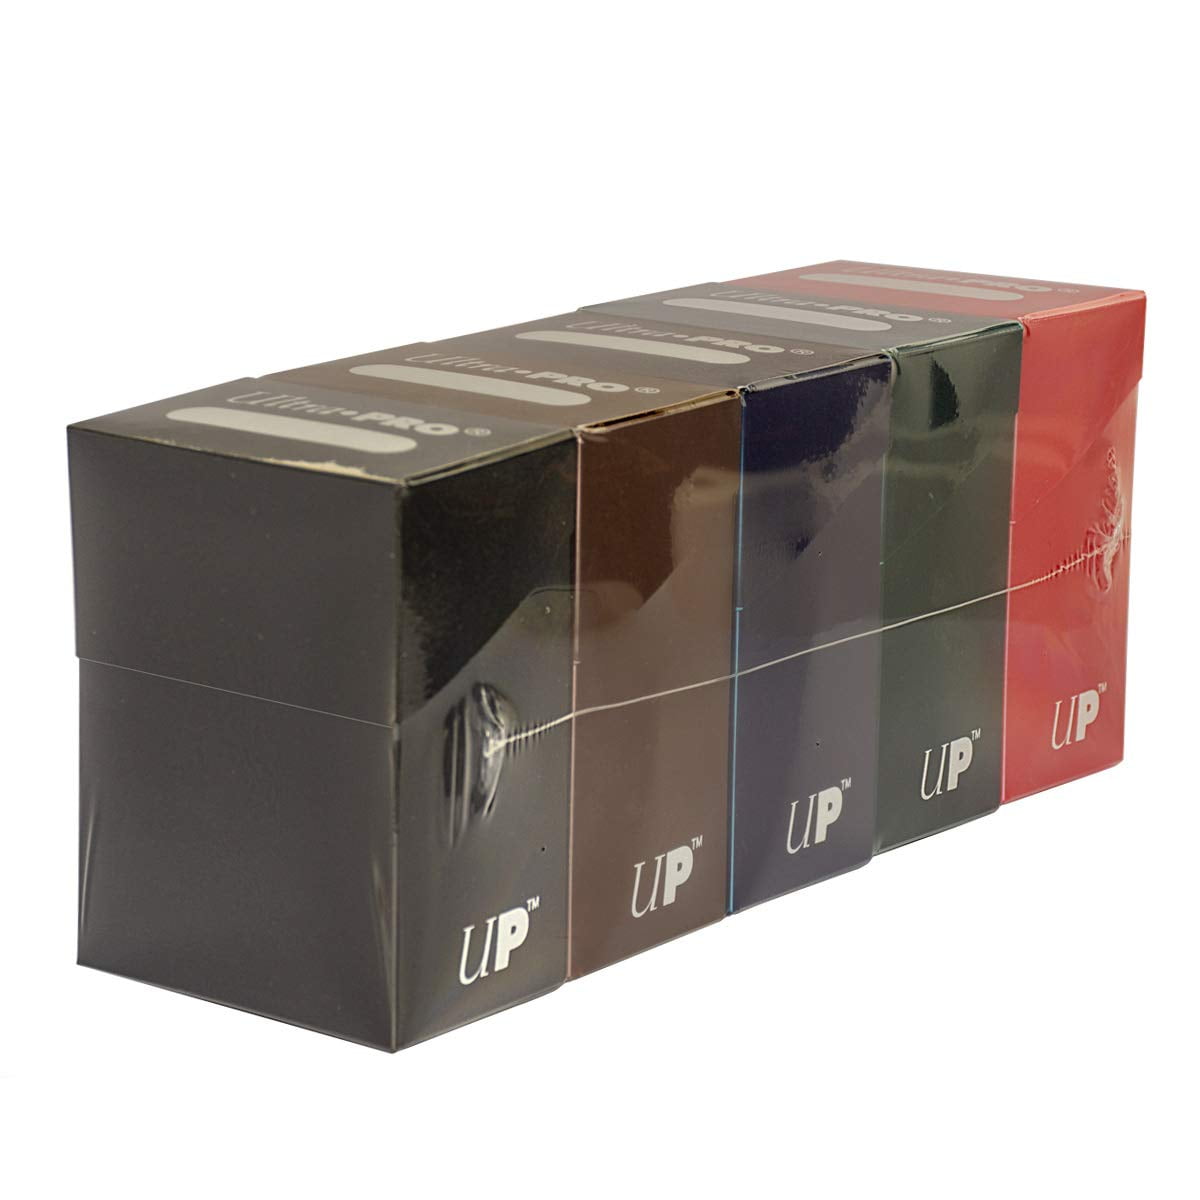 Set of Five New Ultra-Pro Deck Boxes for Magic/Pokemon/YuGiOh Cards Dark Colors Incl. Black, Blue, Brown, Green, and Red 